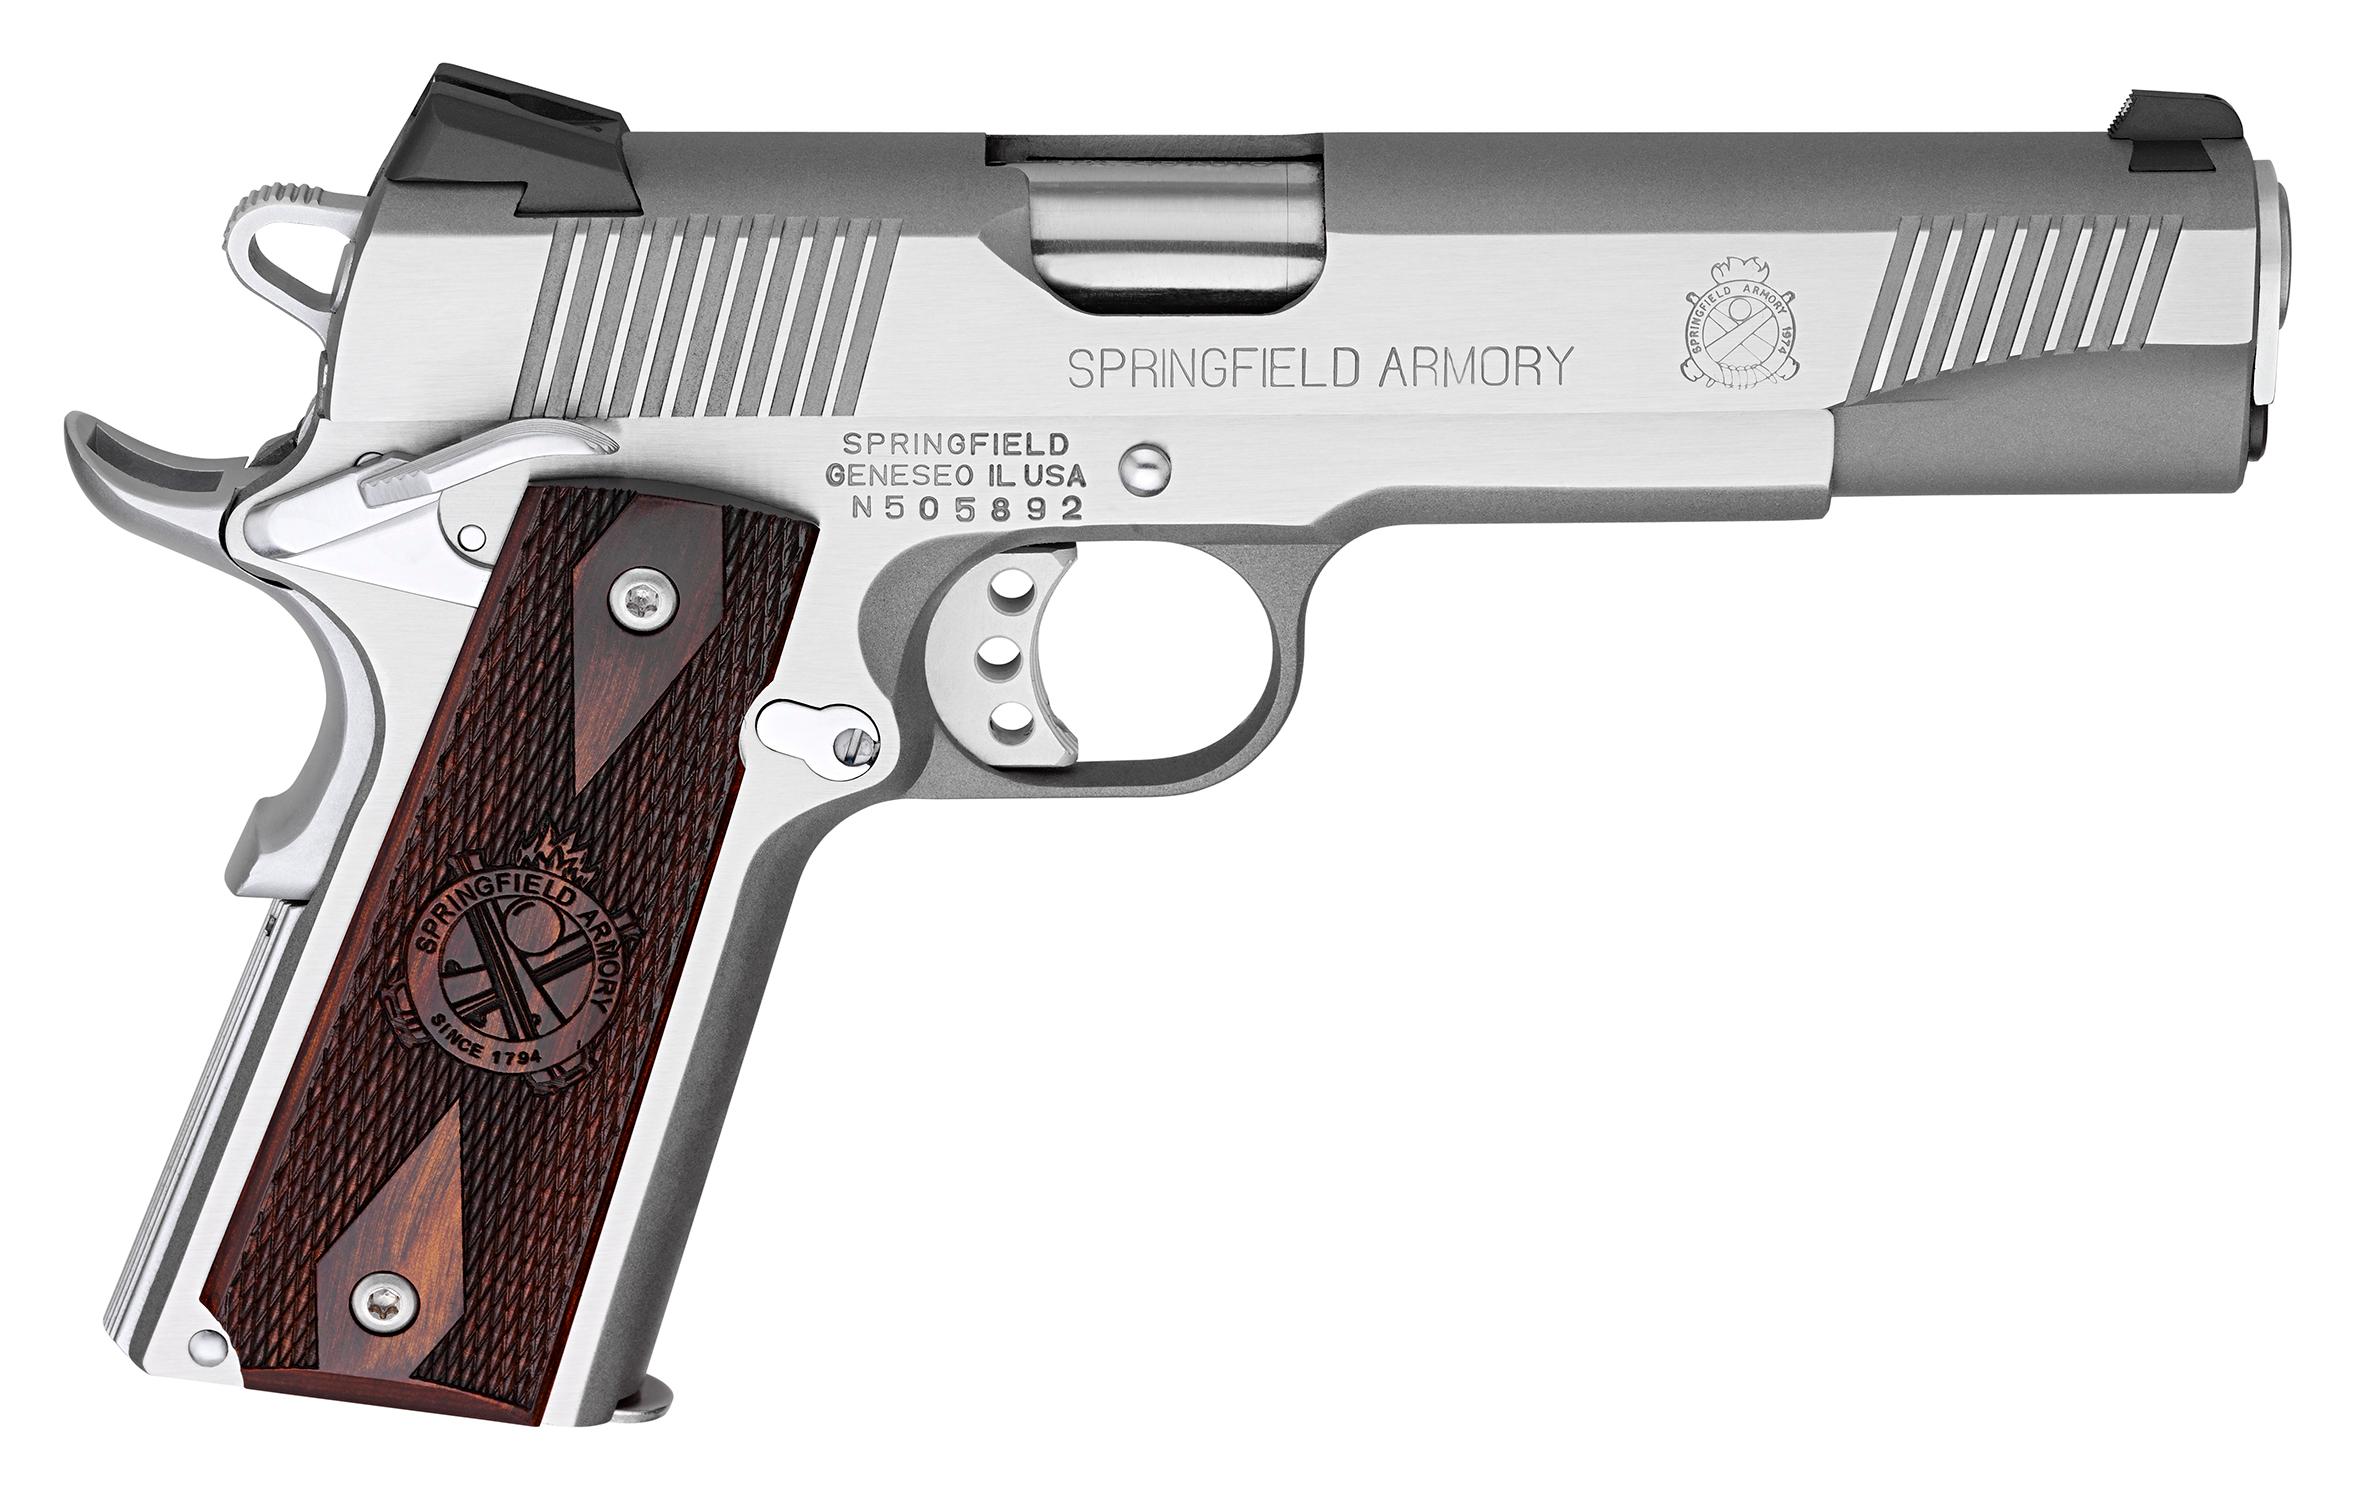  Springfield 1911 Loaded Stainless Steel .45acp